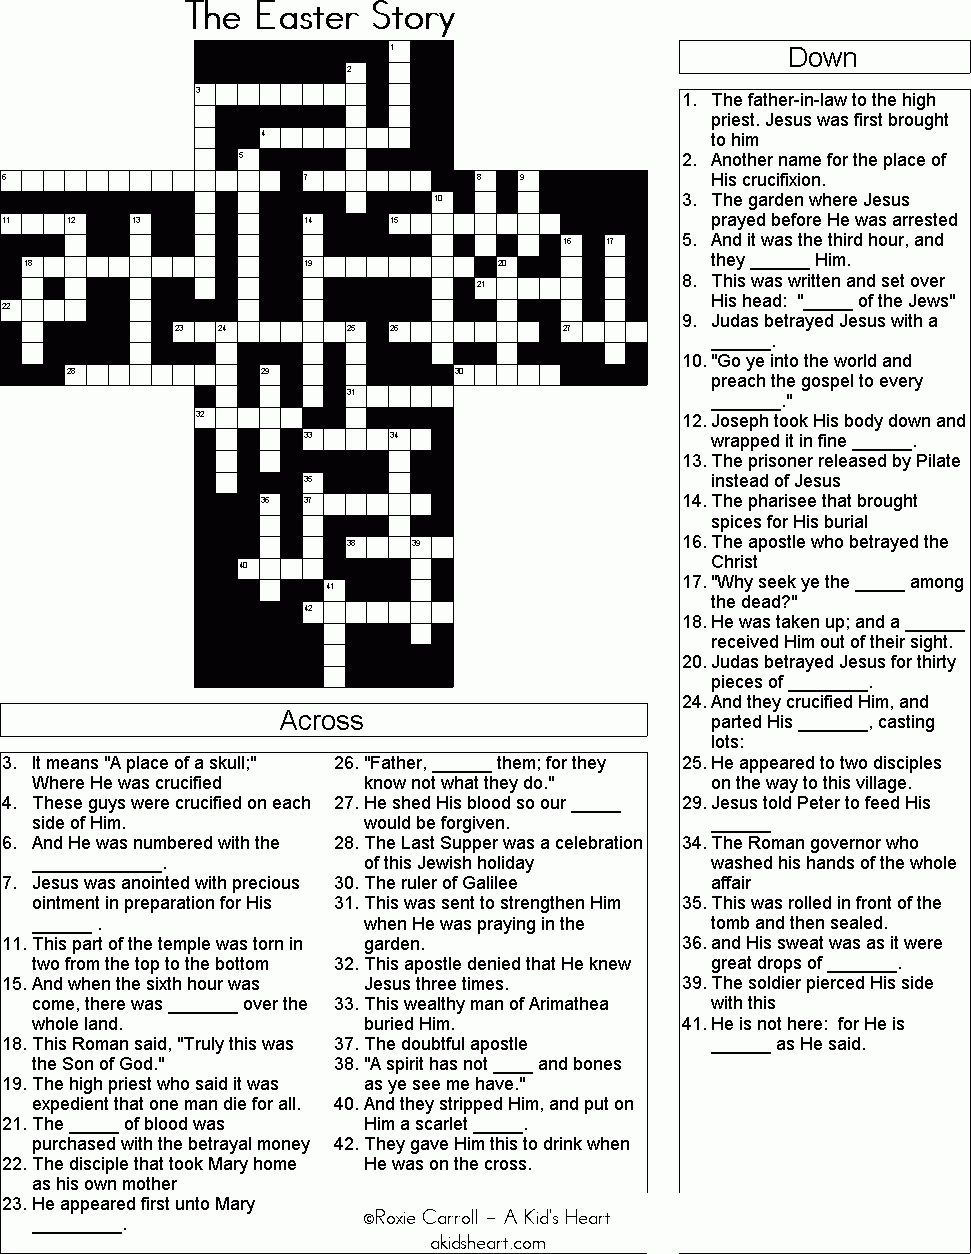 The Easter Story Crossword Puzzle | Bible Crosswords/word Search - Printable Crossword Puzzles Bible